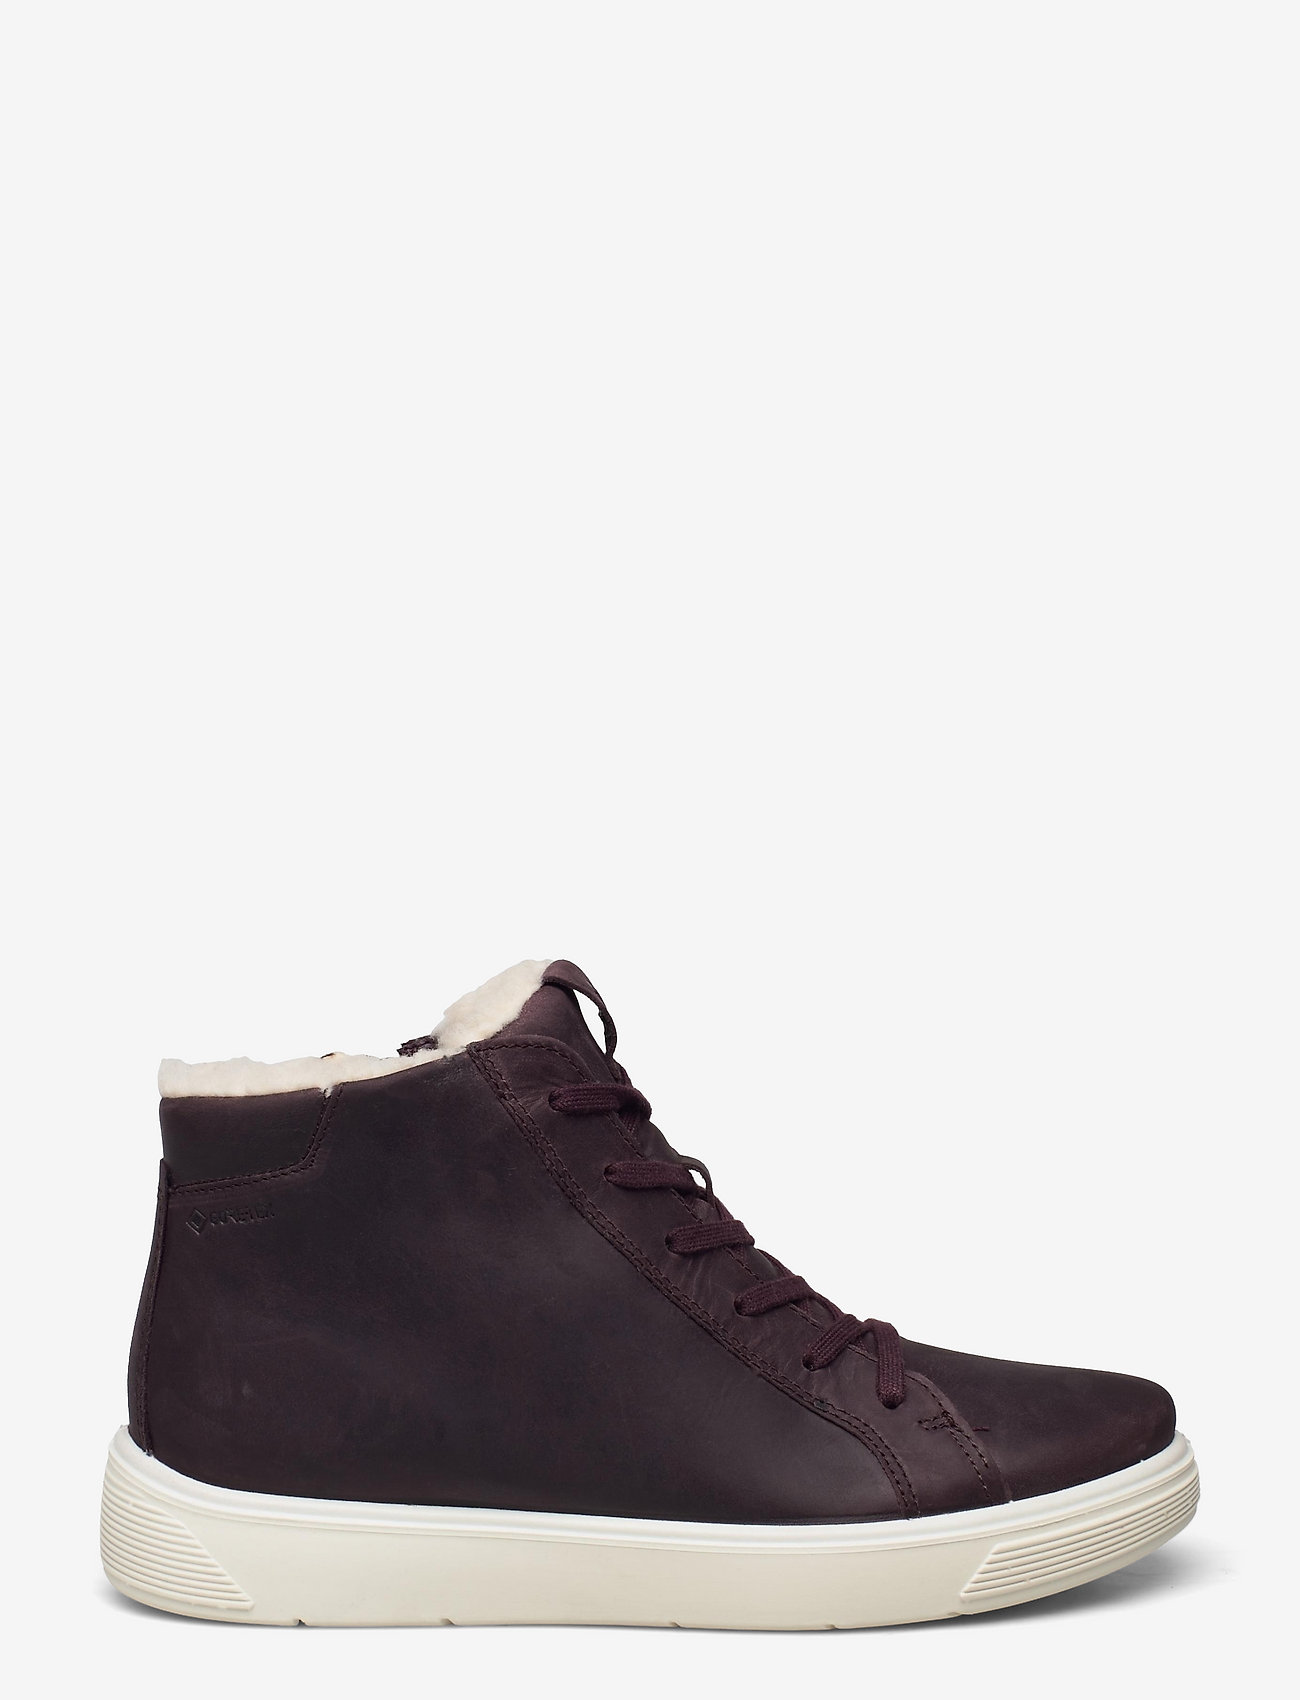 ECCO - STREET TRAY K - winter boots - fig - 1